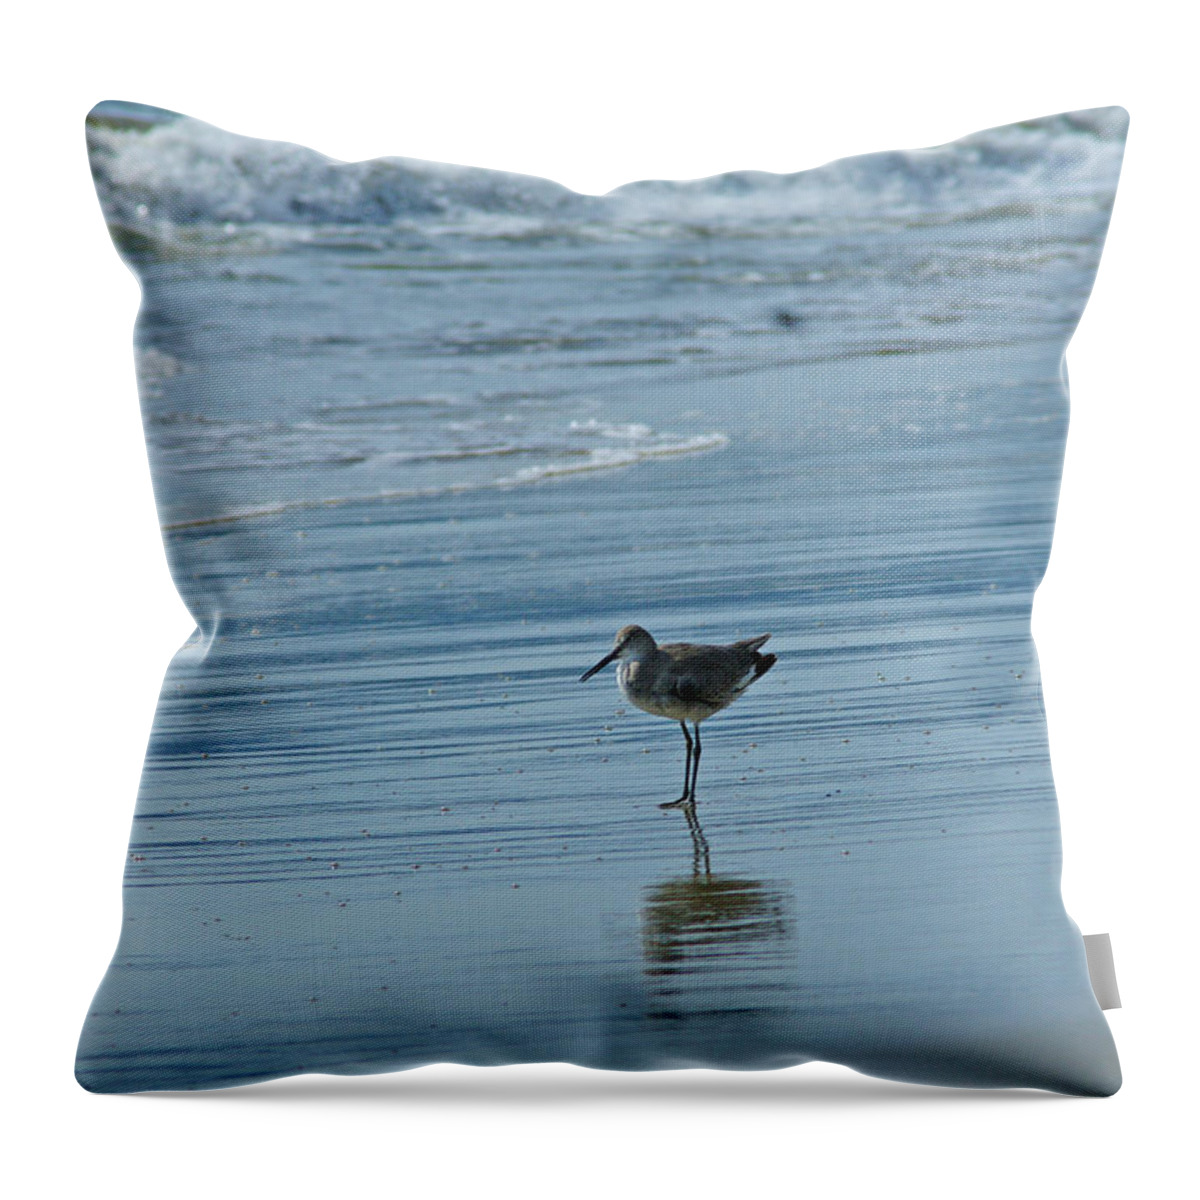 Sandpiper Throw Pillow featuring the photograph Sandpiper on the Beach by Randy Harris